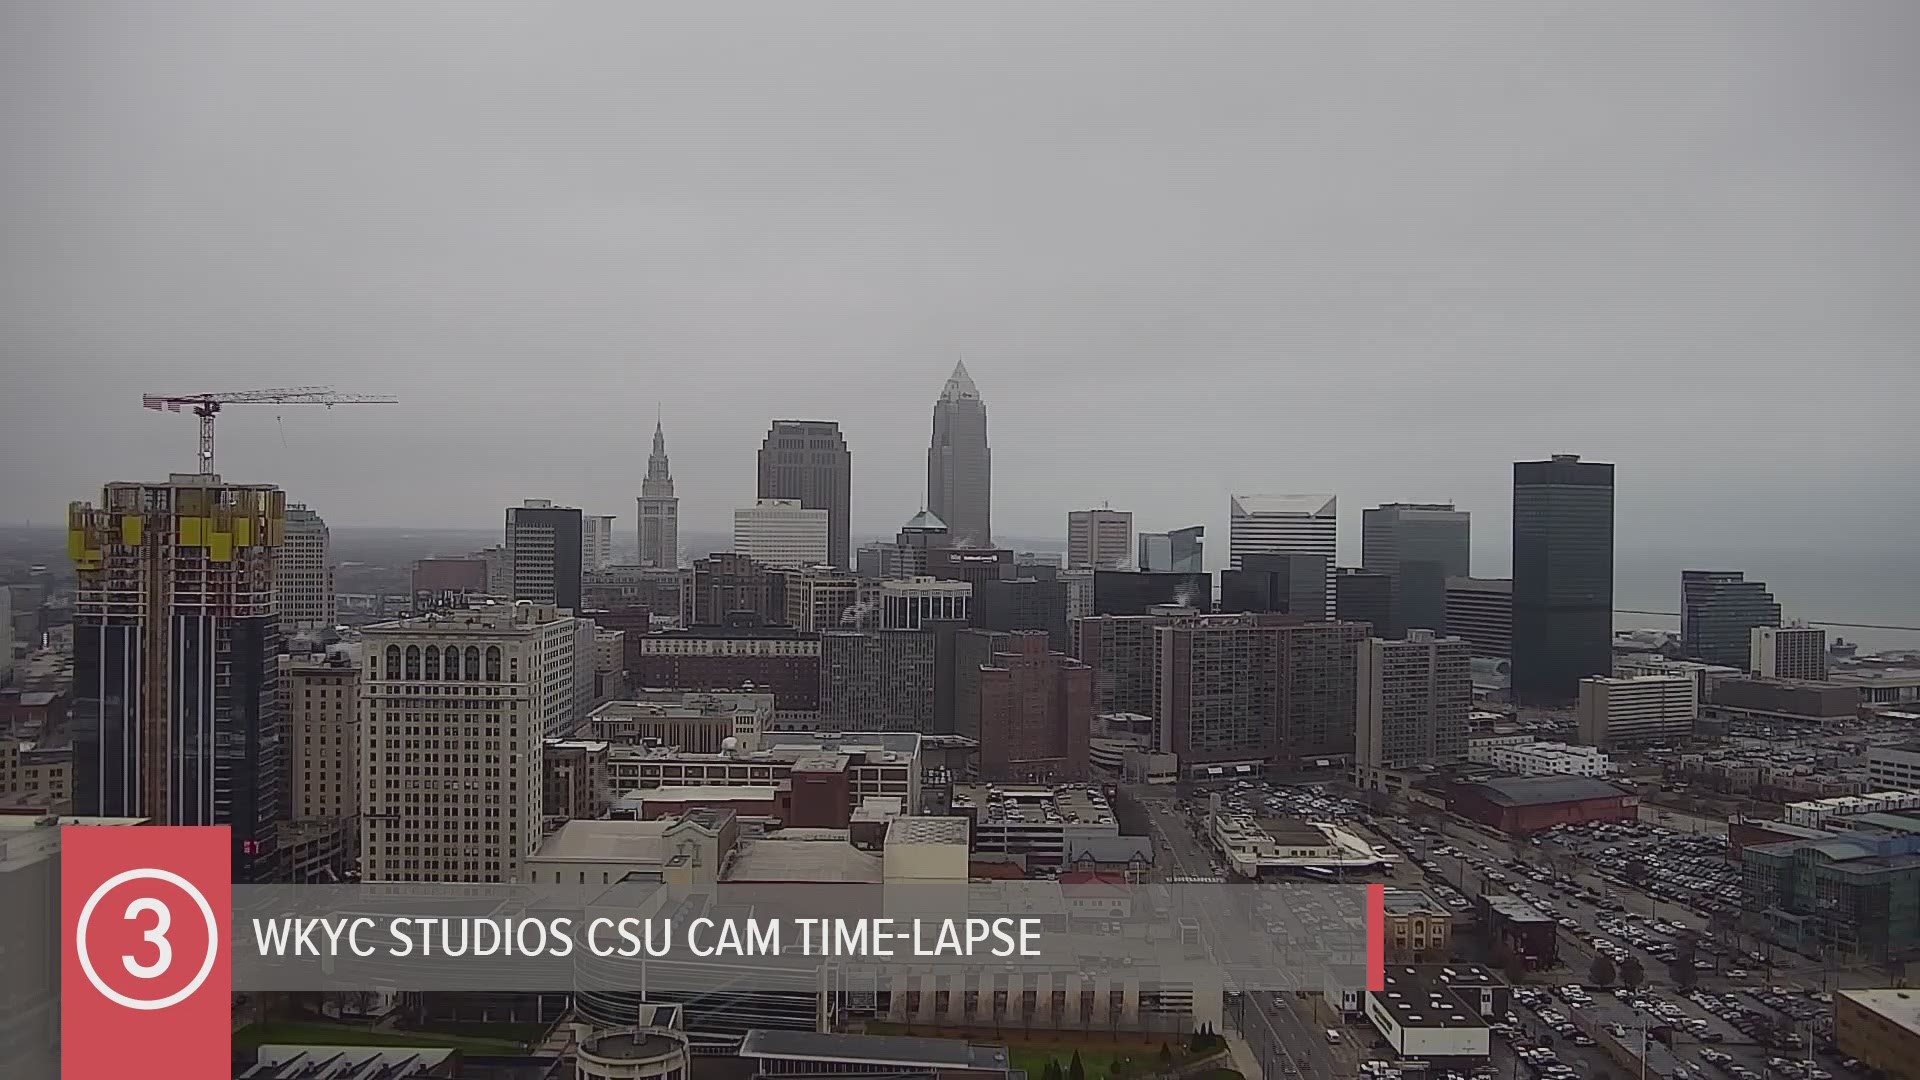 We just can't catch a sunshine break. Another cloudy day and some snow showers on Tuesday across the Cleveland area from our WKYC Studios CSU Cam time-lapse for 12/3